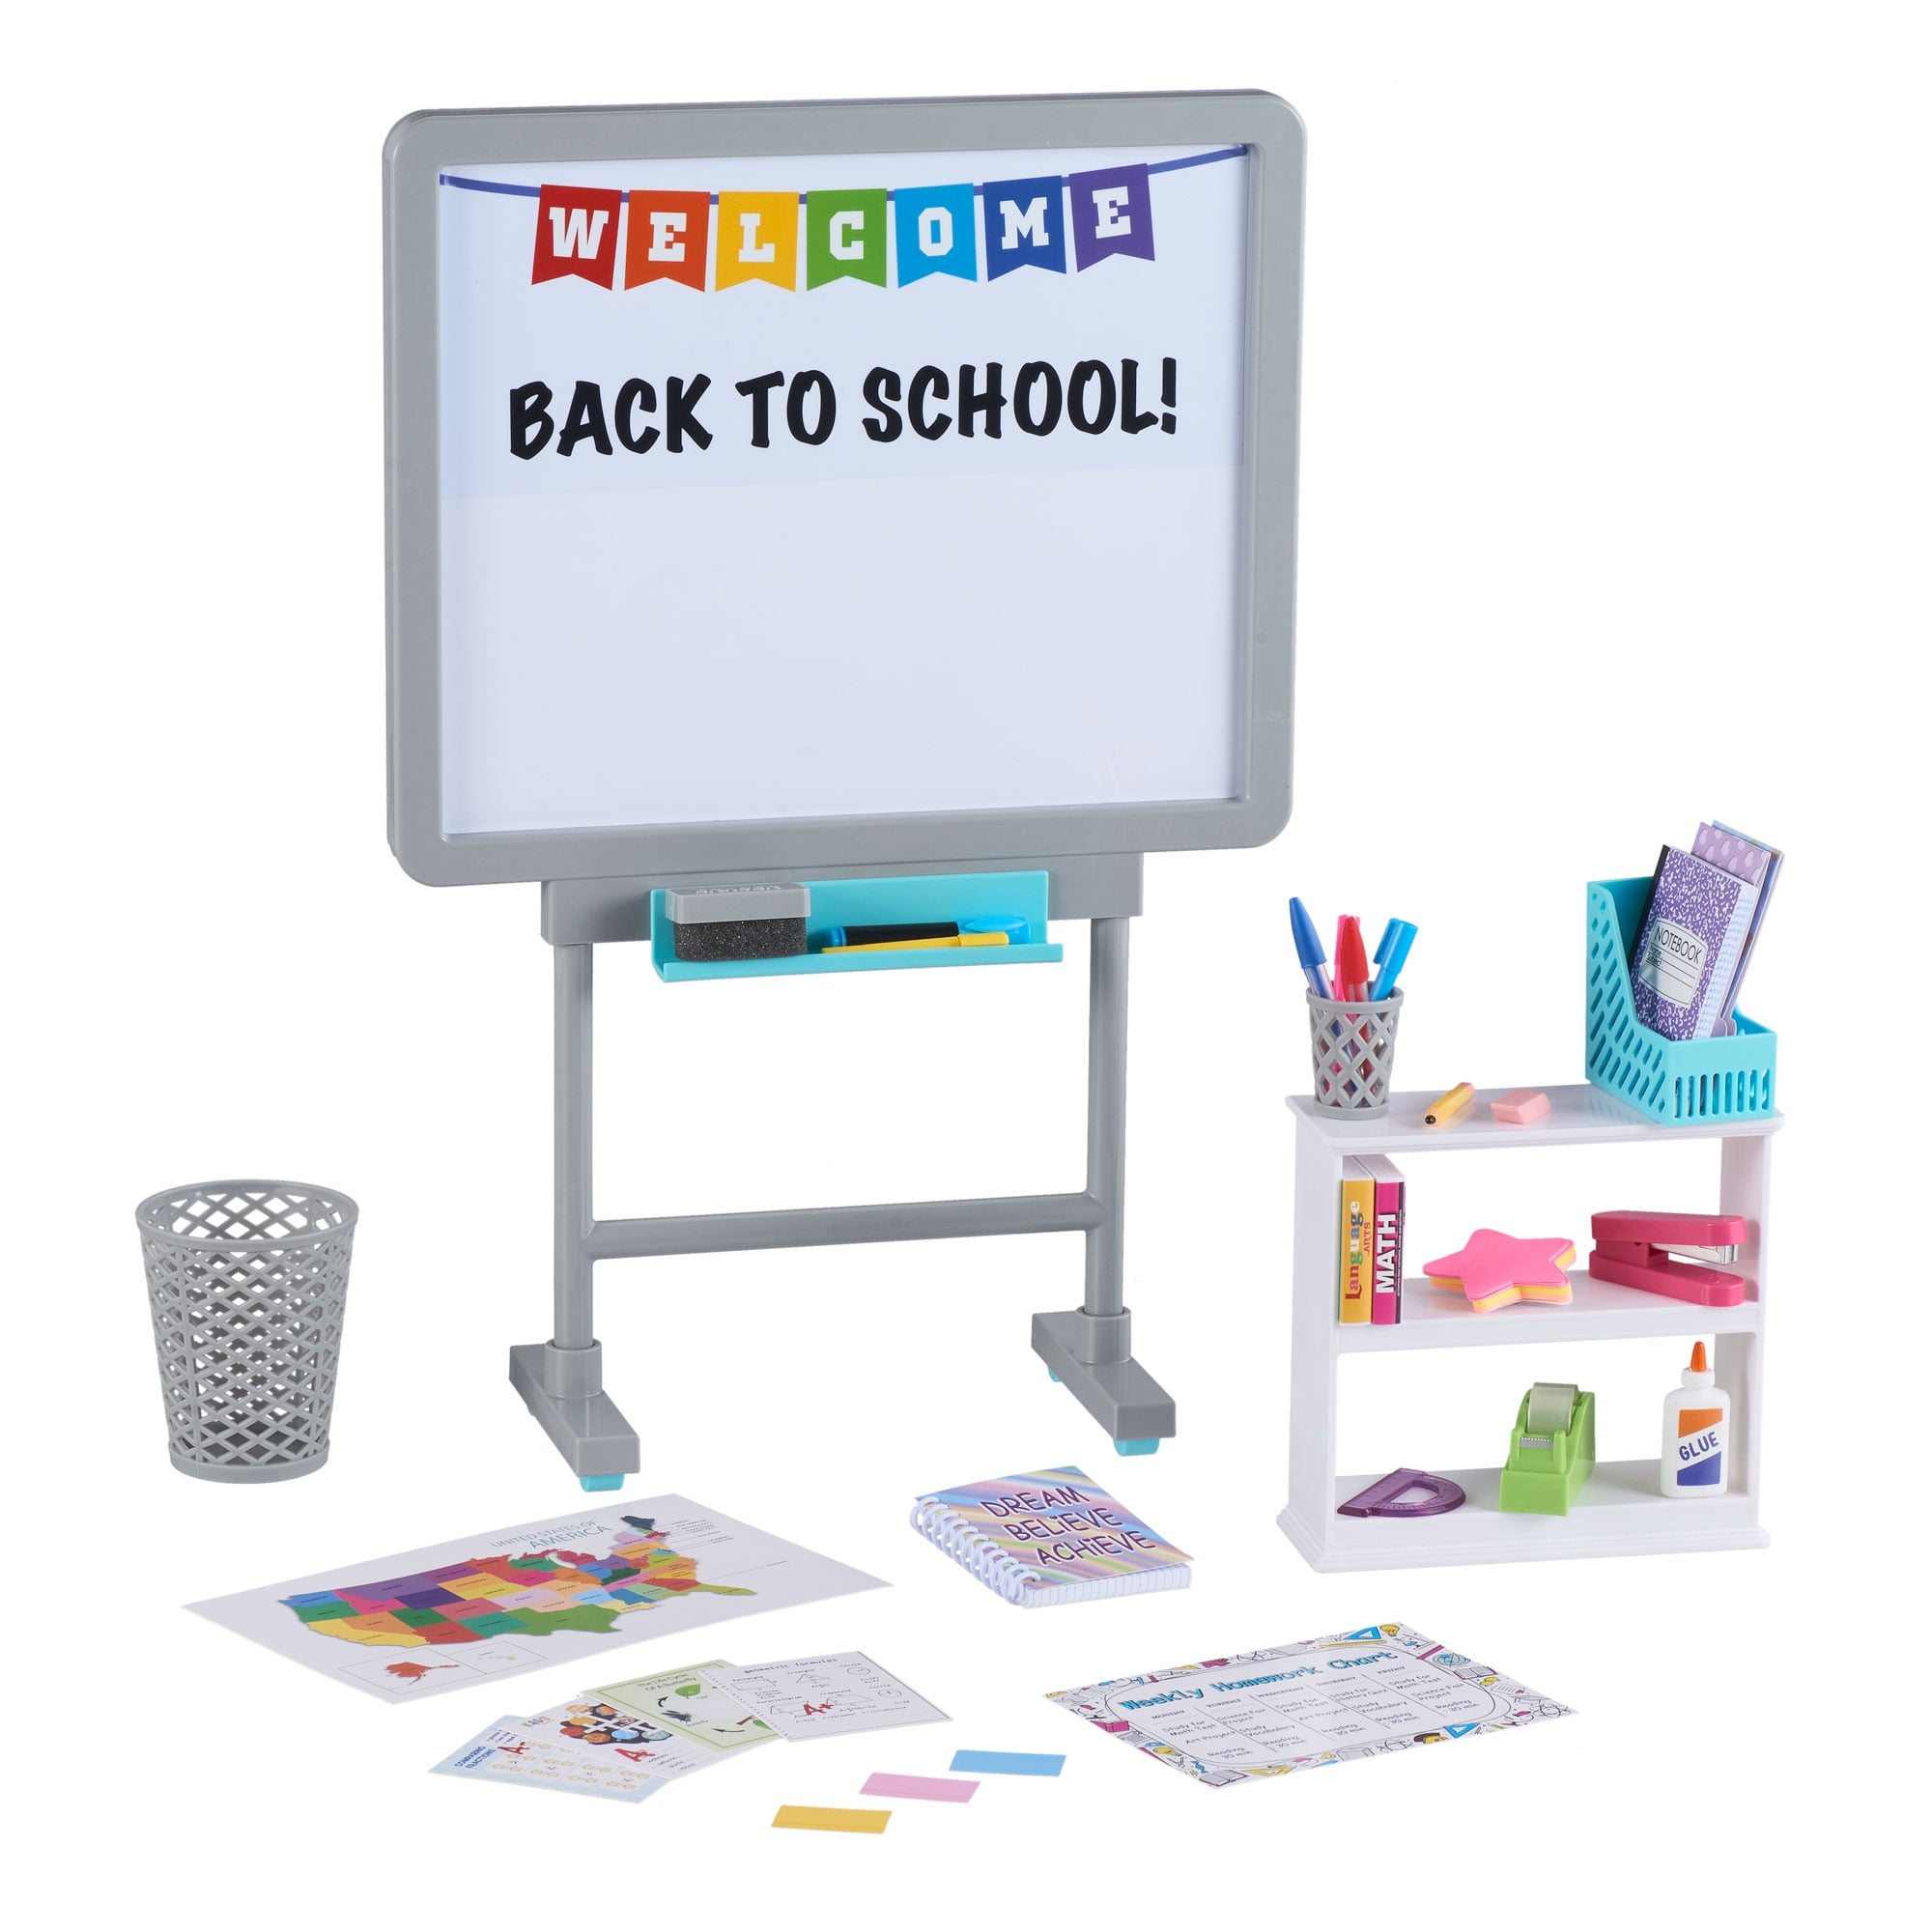 My Life As Classroom Play Set for 18 Inch Dolls